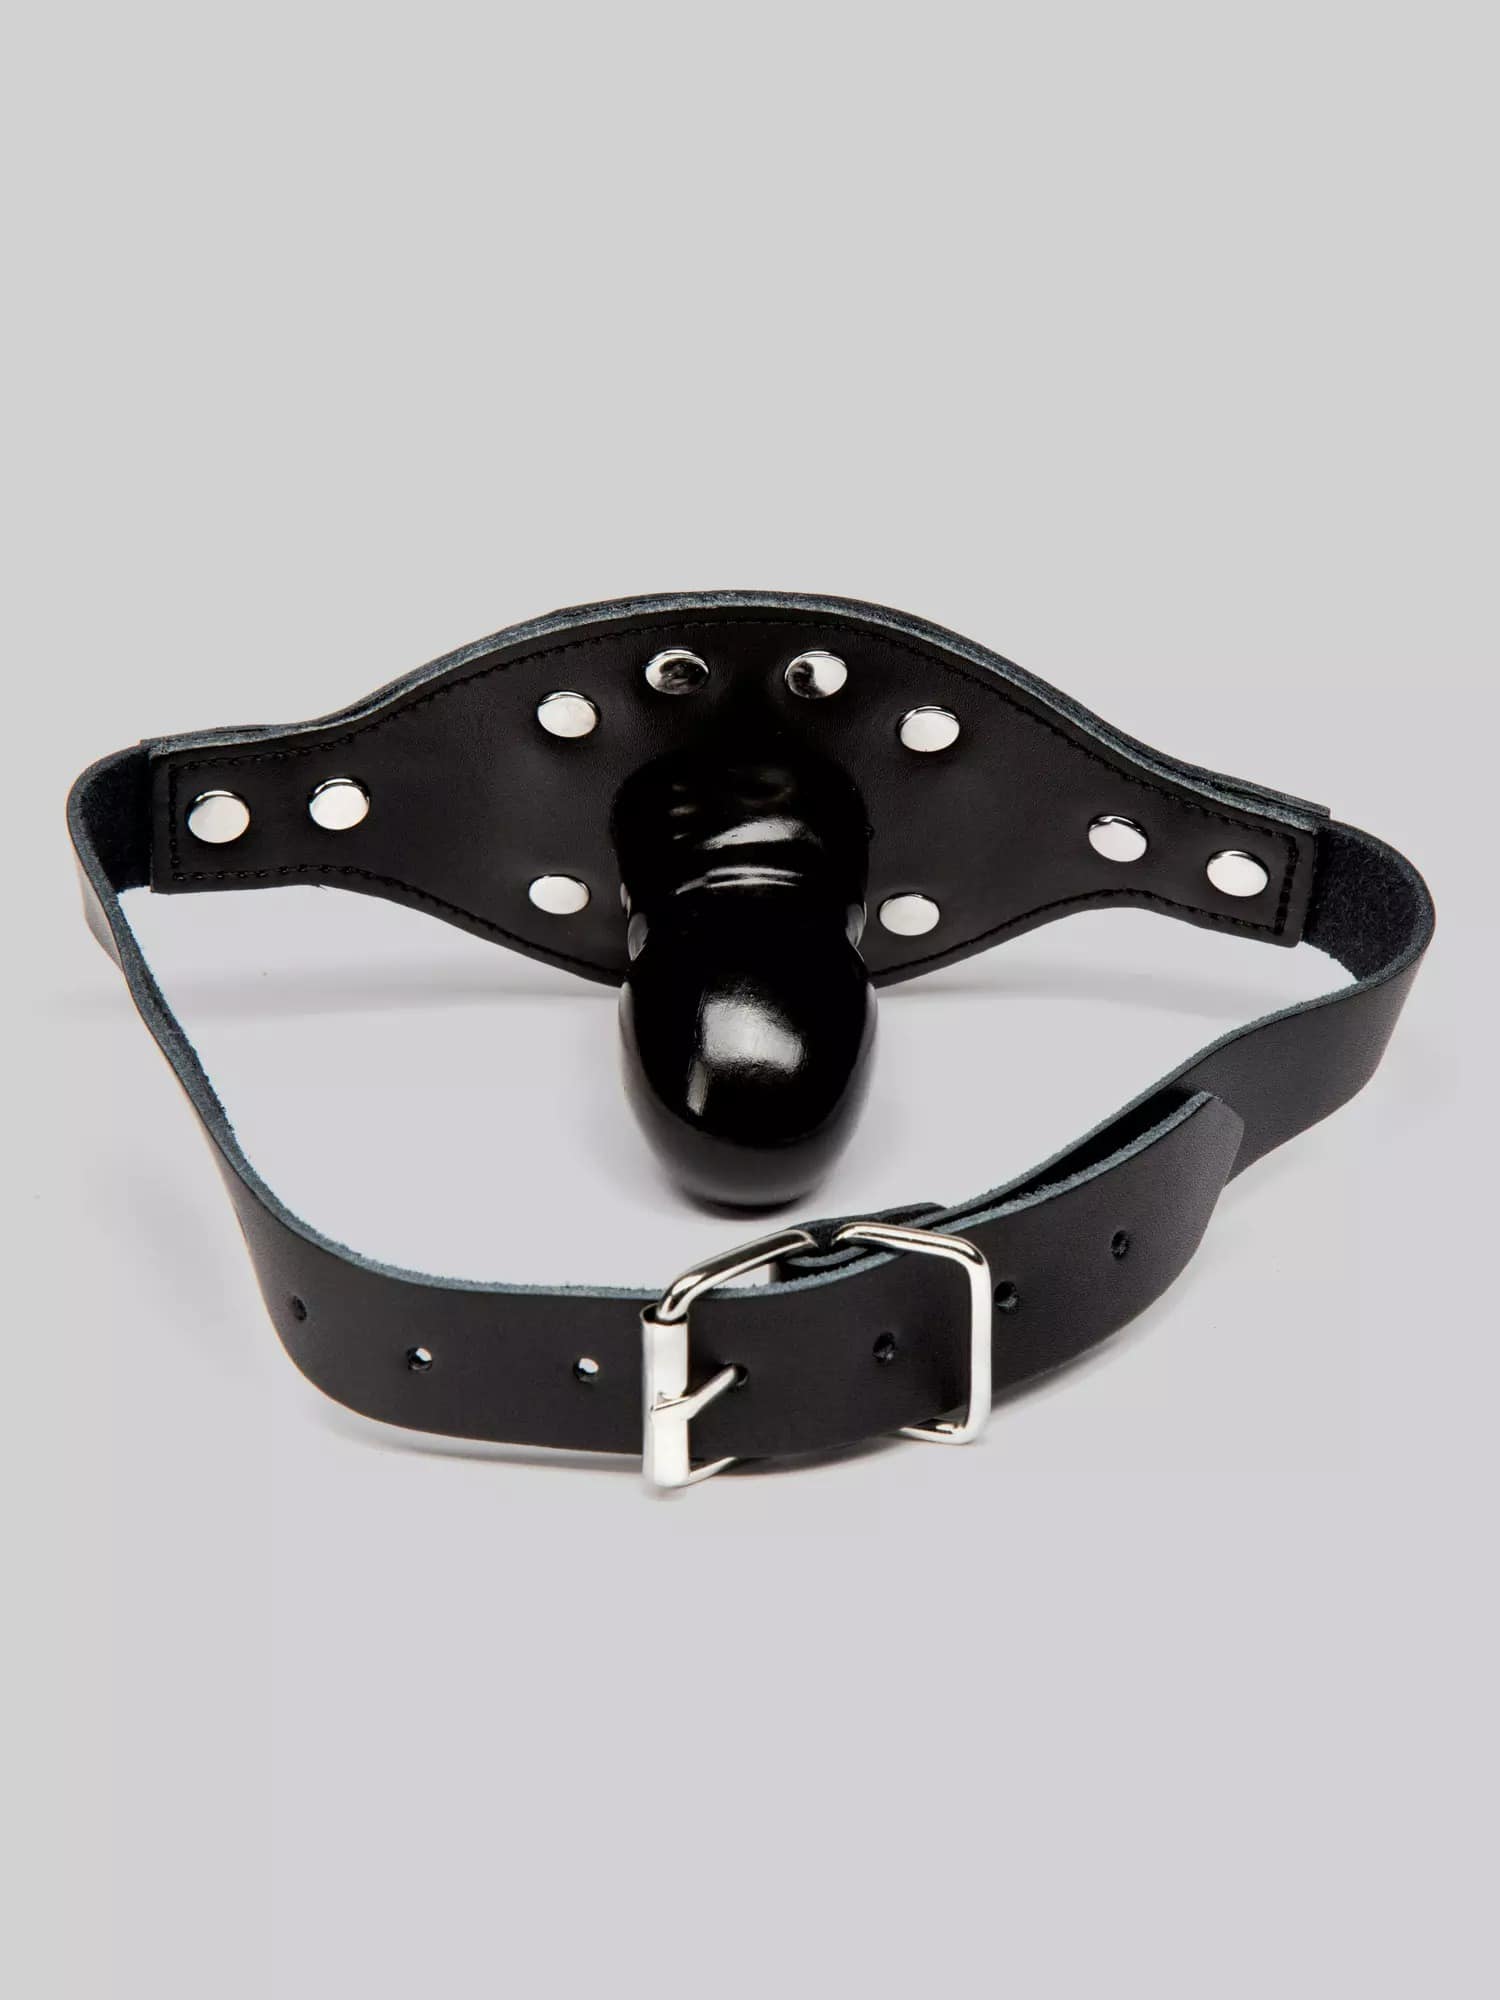 Product Leather and Studs Dildo Gag